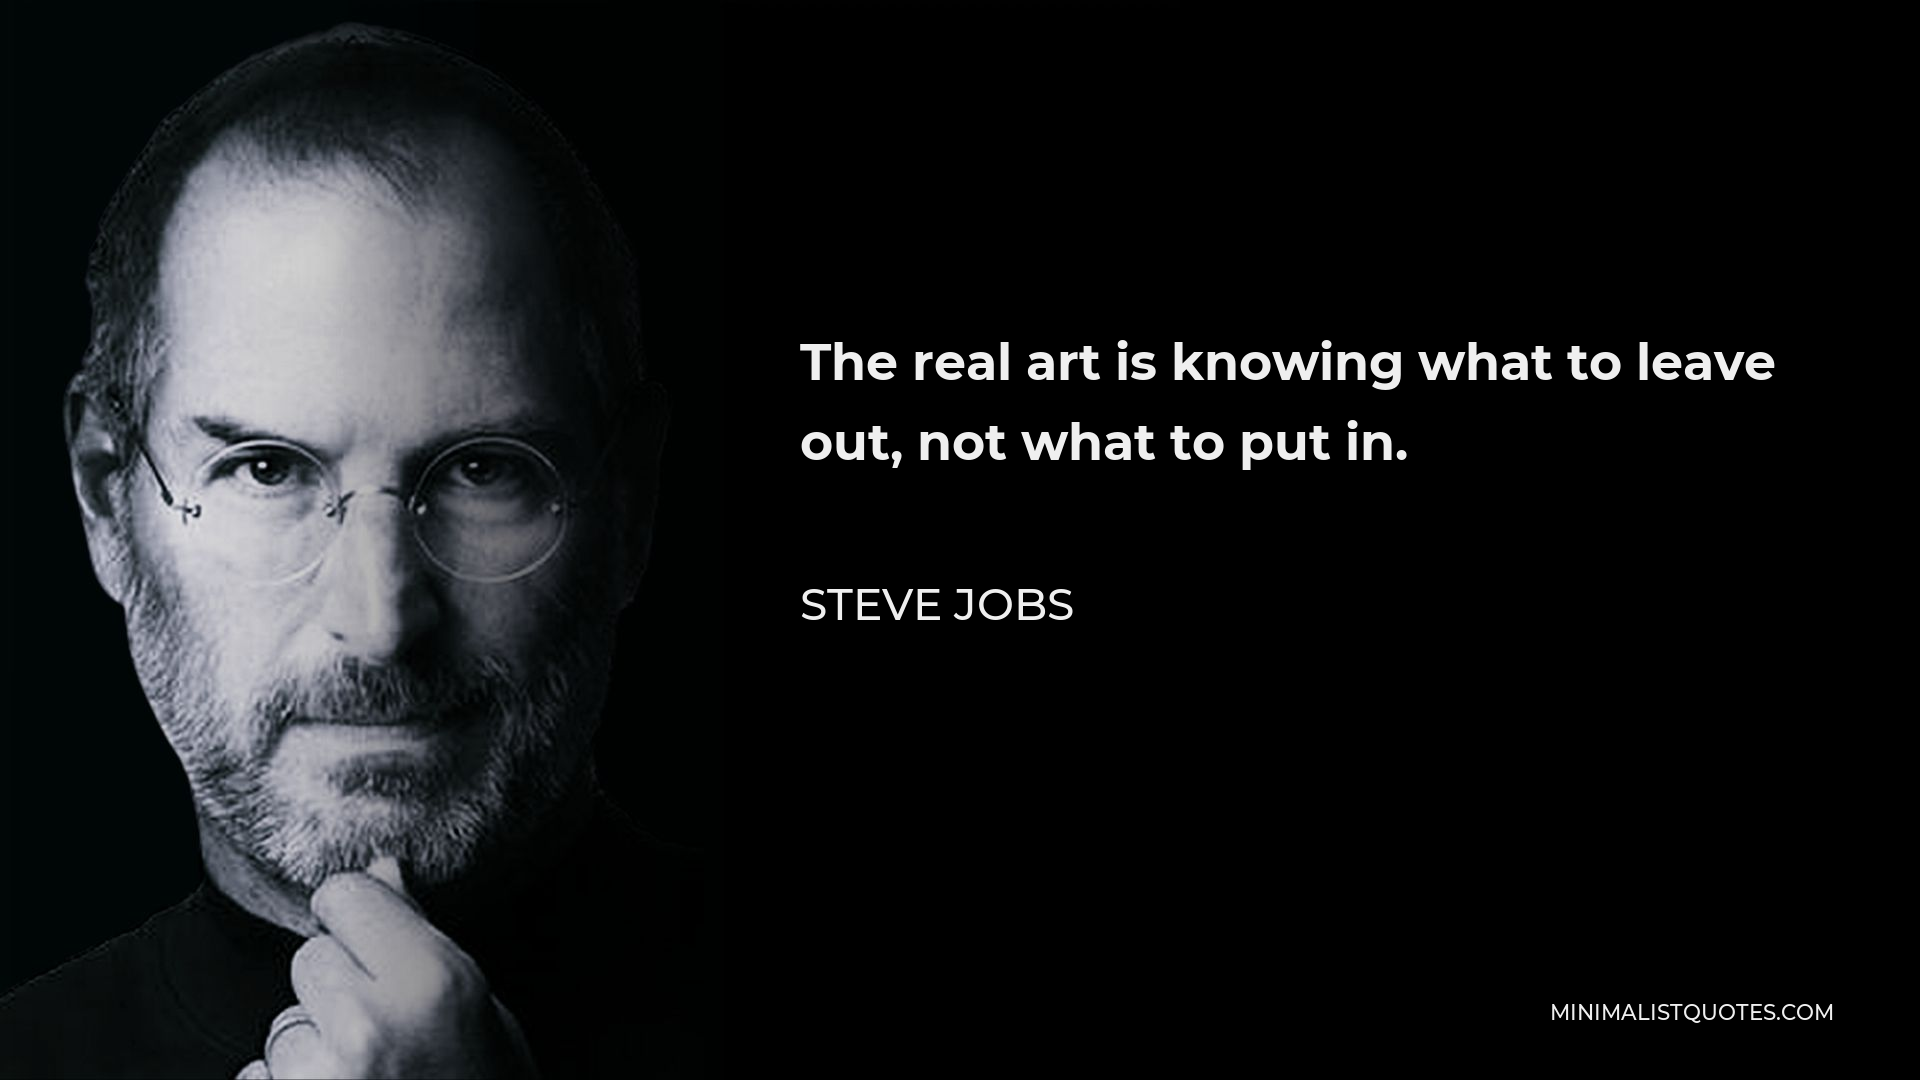 Steve Jobs Quote - The real art is knowing what to leave out, not what to put in.